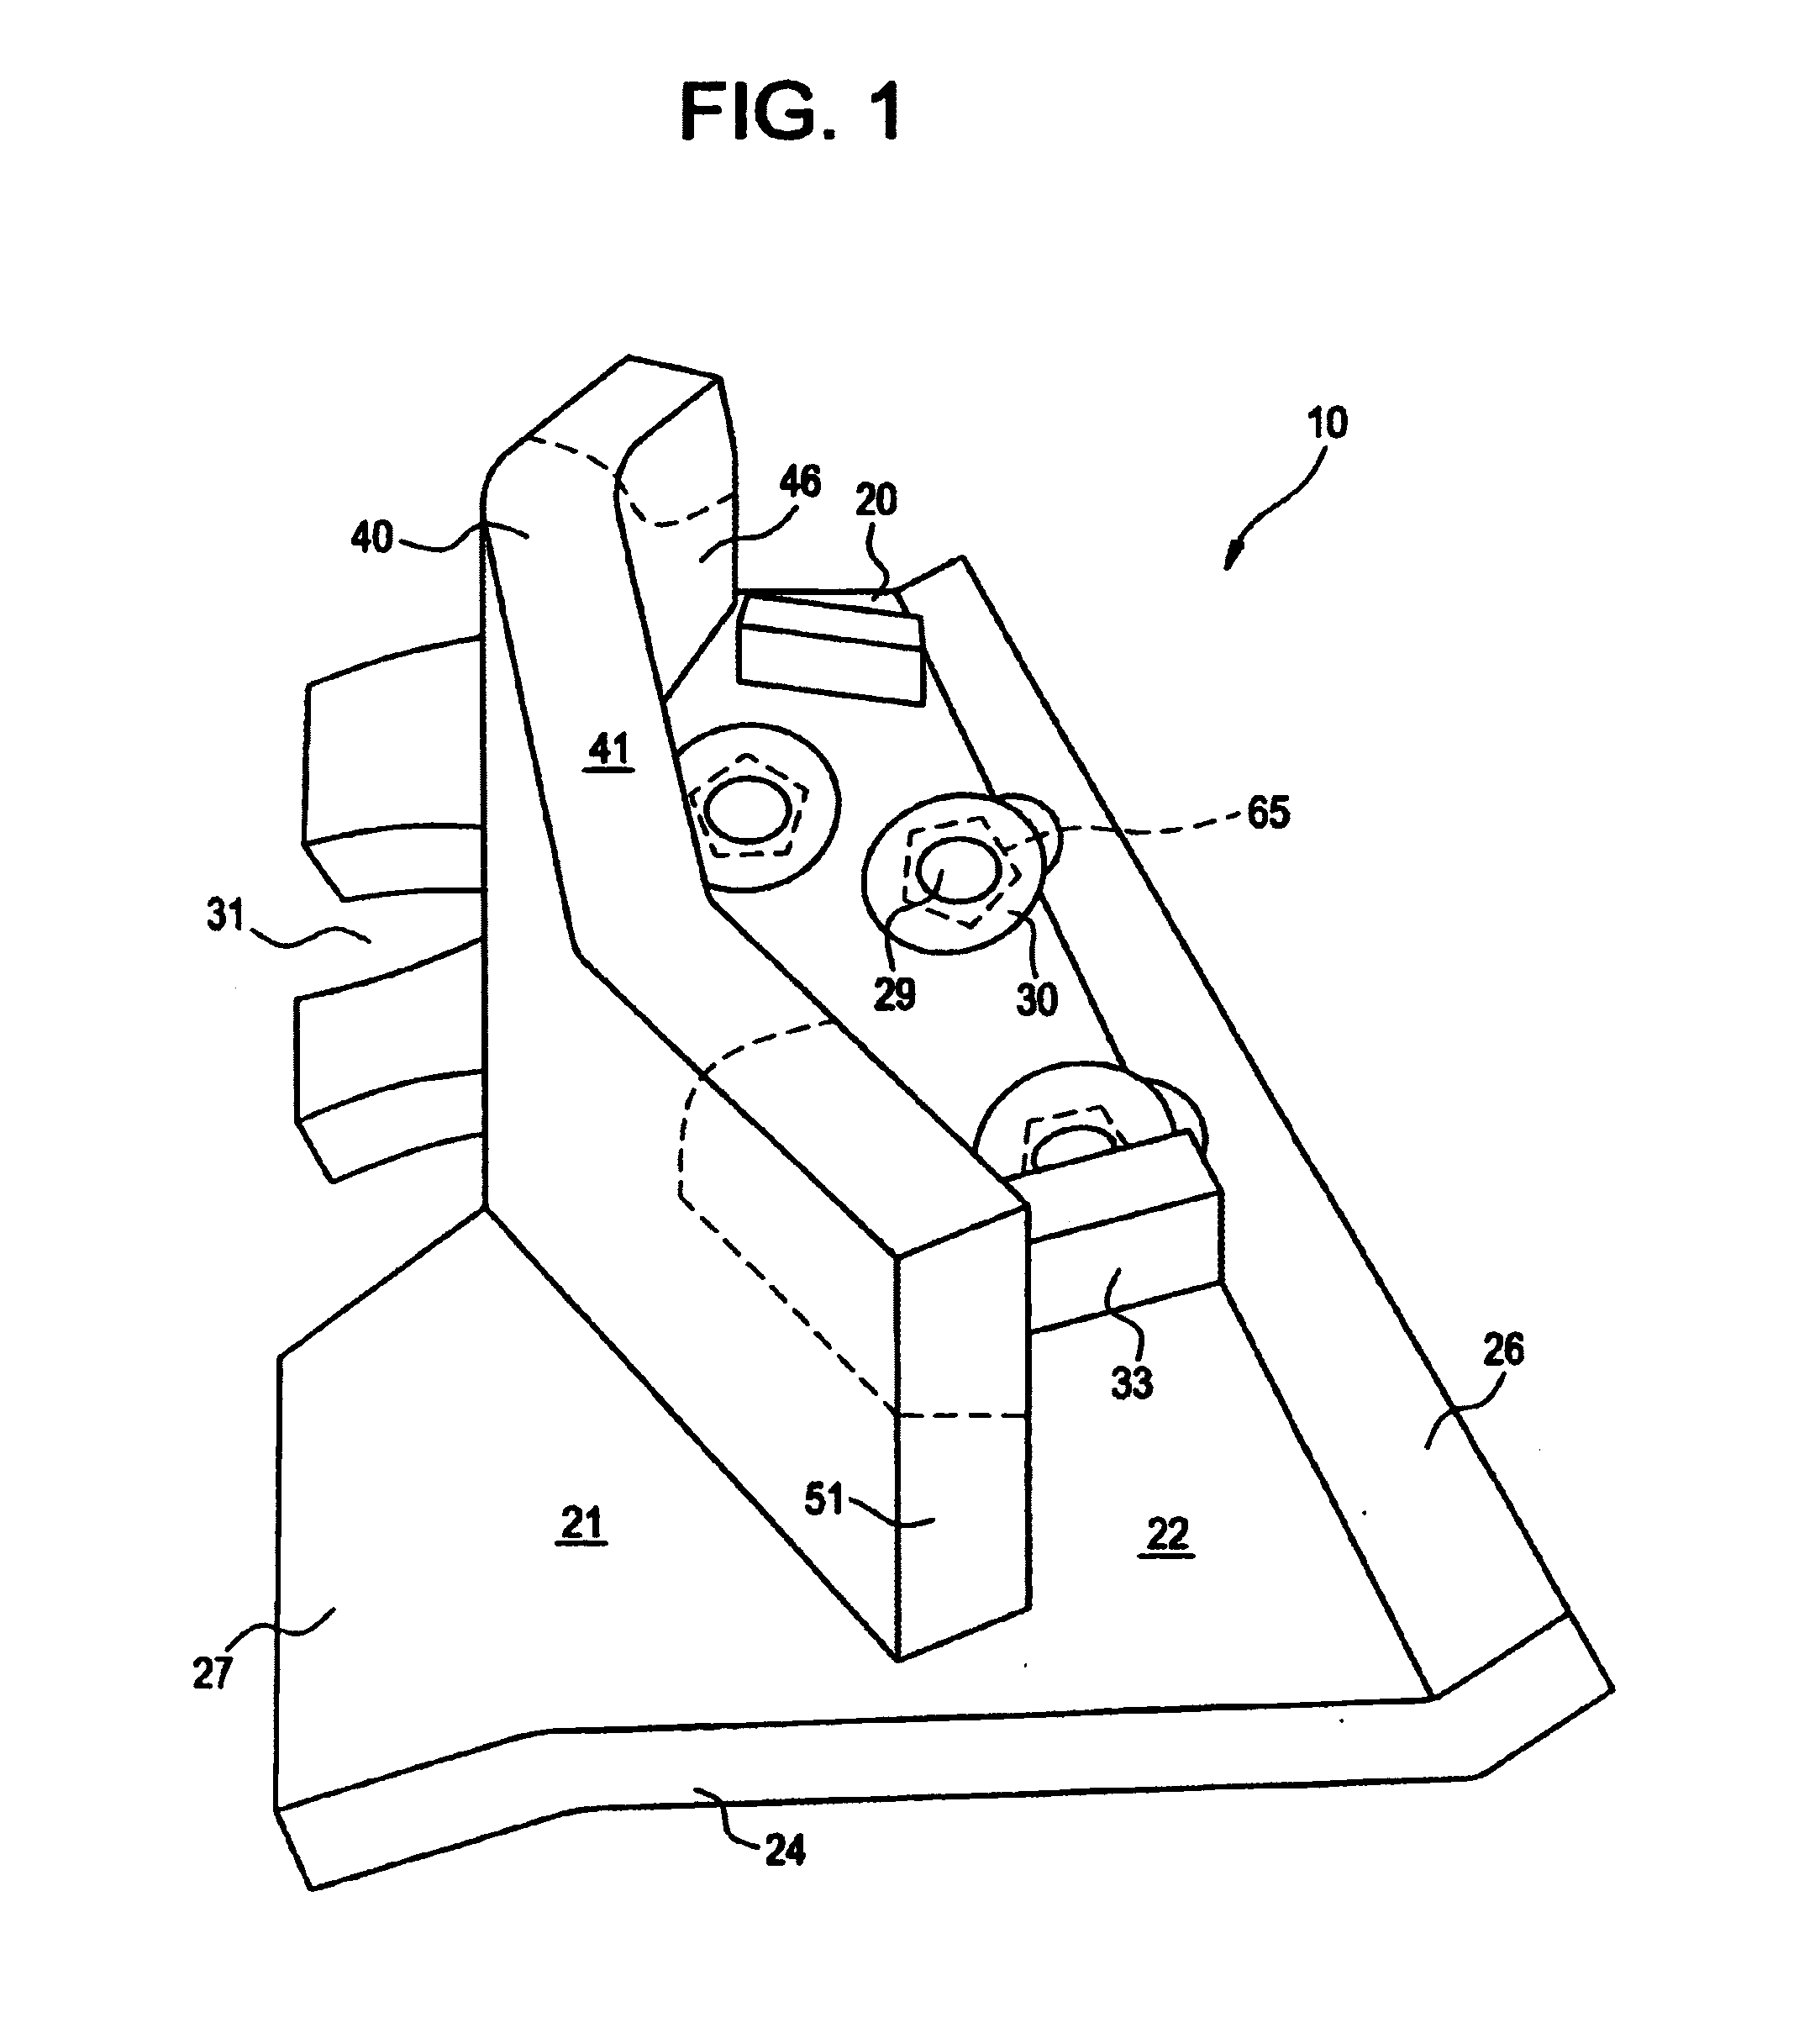 Grouser shoe and fabrication method